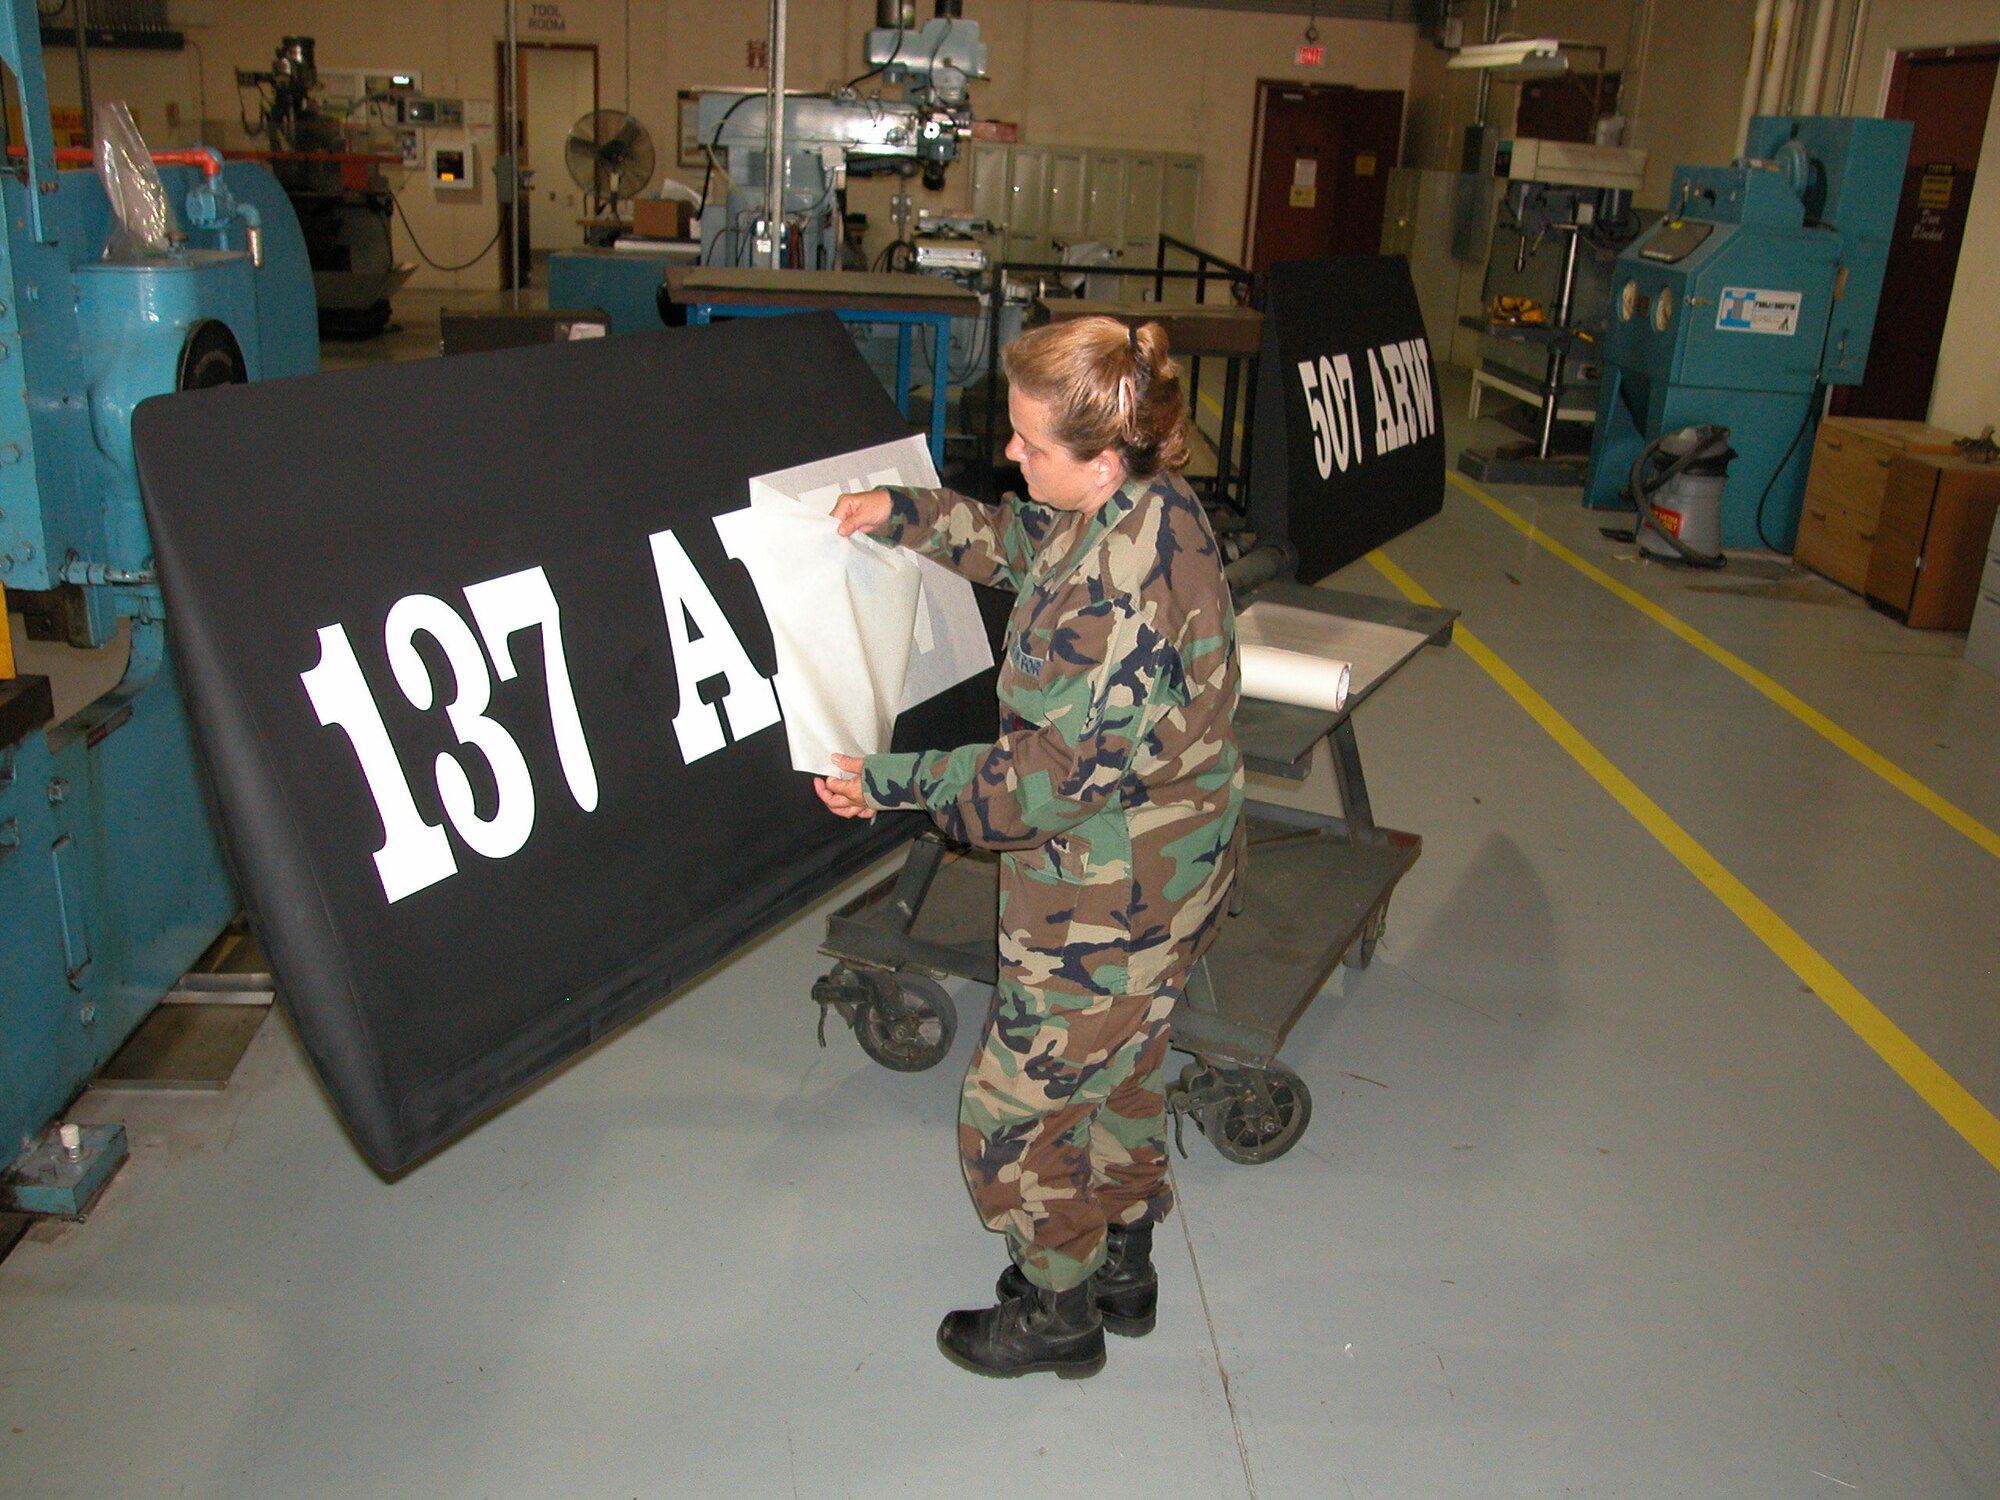 Staff Sgt. Sue Hathaway, a structural repair and corrosion control technician with the Air Force Reserve's 507th Air Refueling Wing, peels away transfer paper backing while applying new lettering to a KC-135 ruddervator.  
  As a result of the 2005 BRAC process, the 507th Air Refueling Wing became the first Air Force Reserve wing to become host to an Air National Guard wing.  
  The Oklahoma Air National Guard's 137th Air Refueling Wing began flying associate missions here at Tinker Air Force base earlier this year.   Assigning dual wing identification on the KC-135 ruddervator is part of local processes to provide identification and partnership parity.  